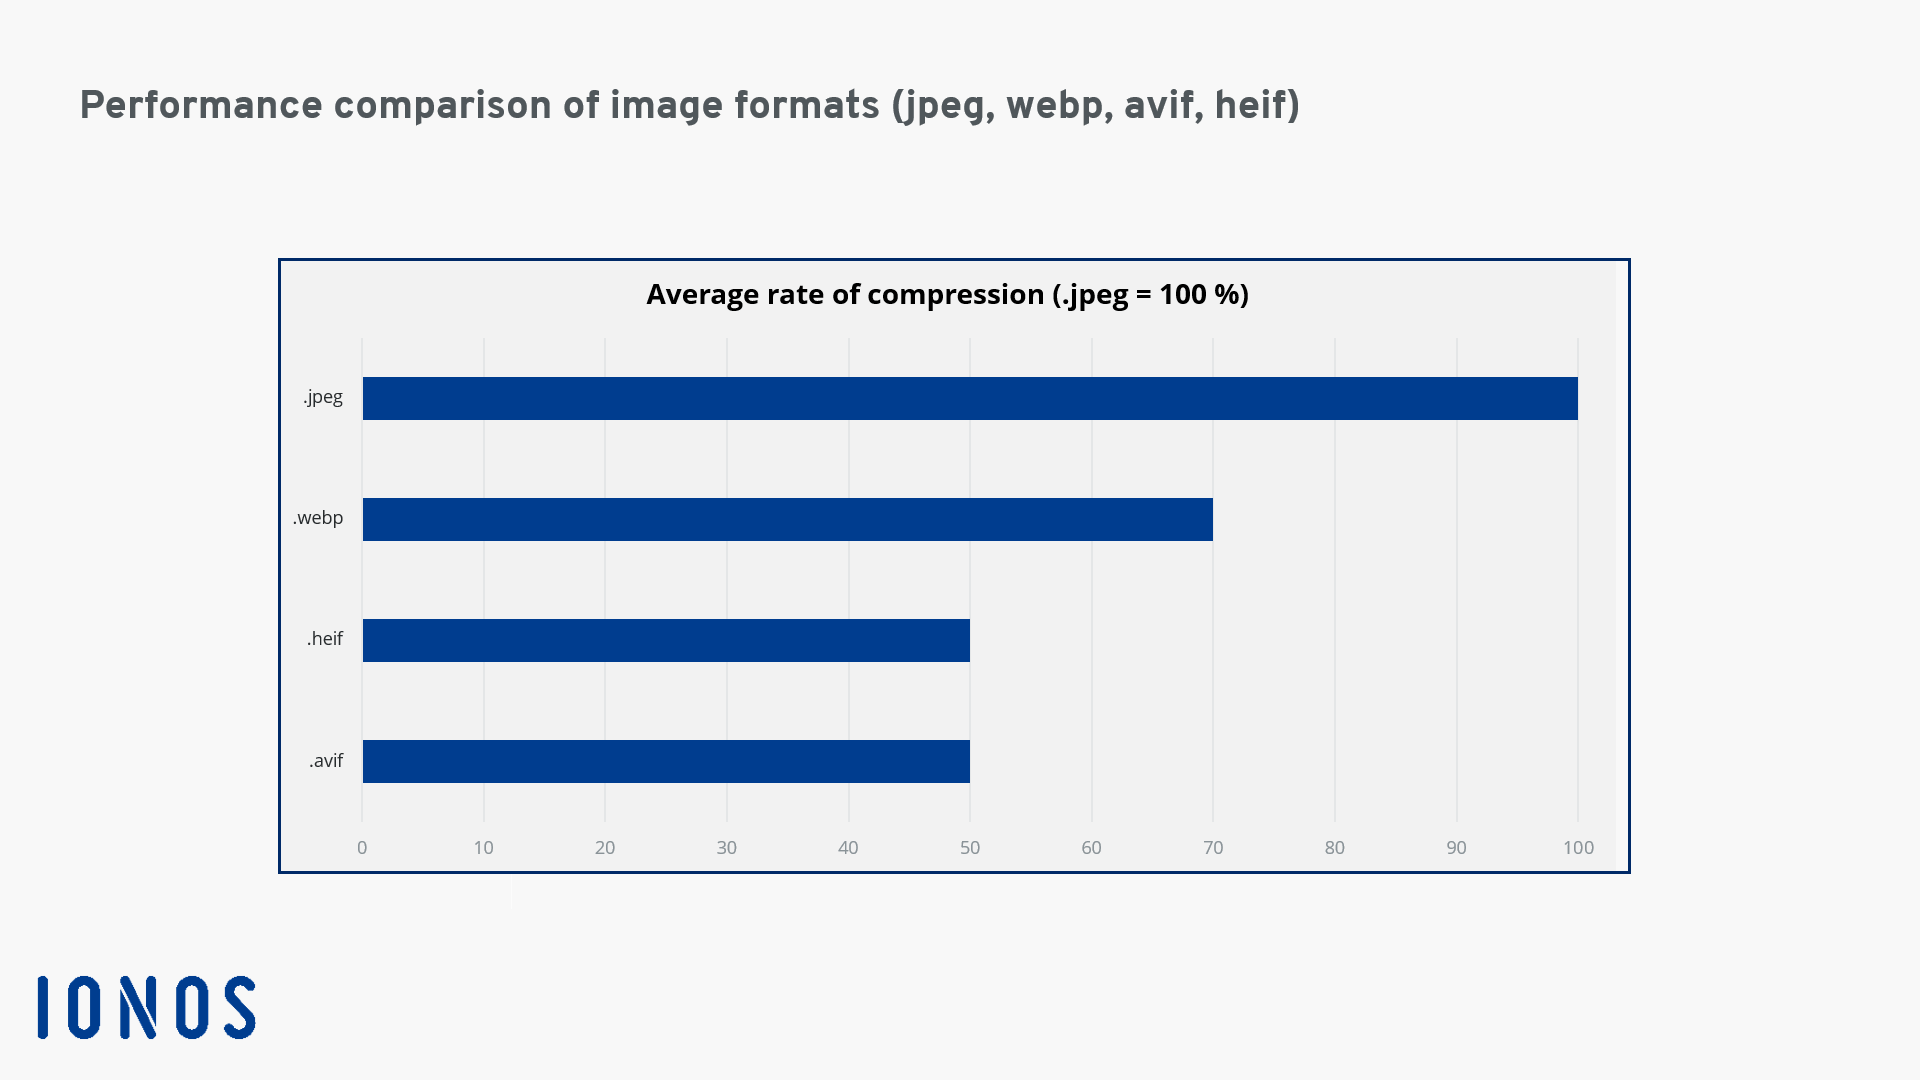 AVIF image format compared